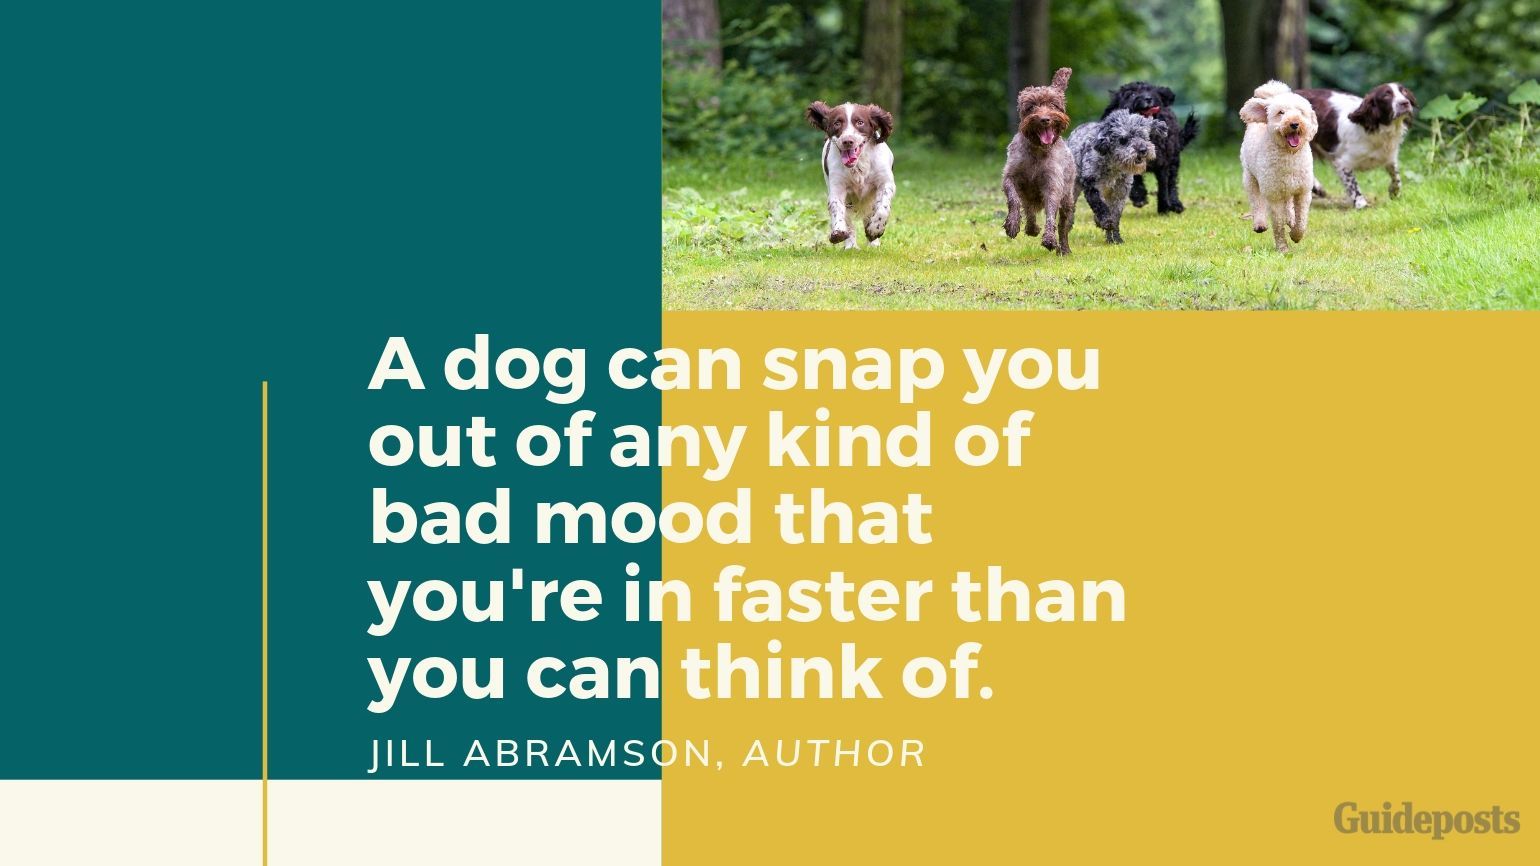 Sentimental Dog Quote: A dog can snap you out of any kind of bad mood that you're in faster than you can think of. —Jill Abramson, Author dog lover